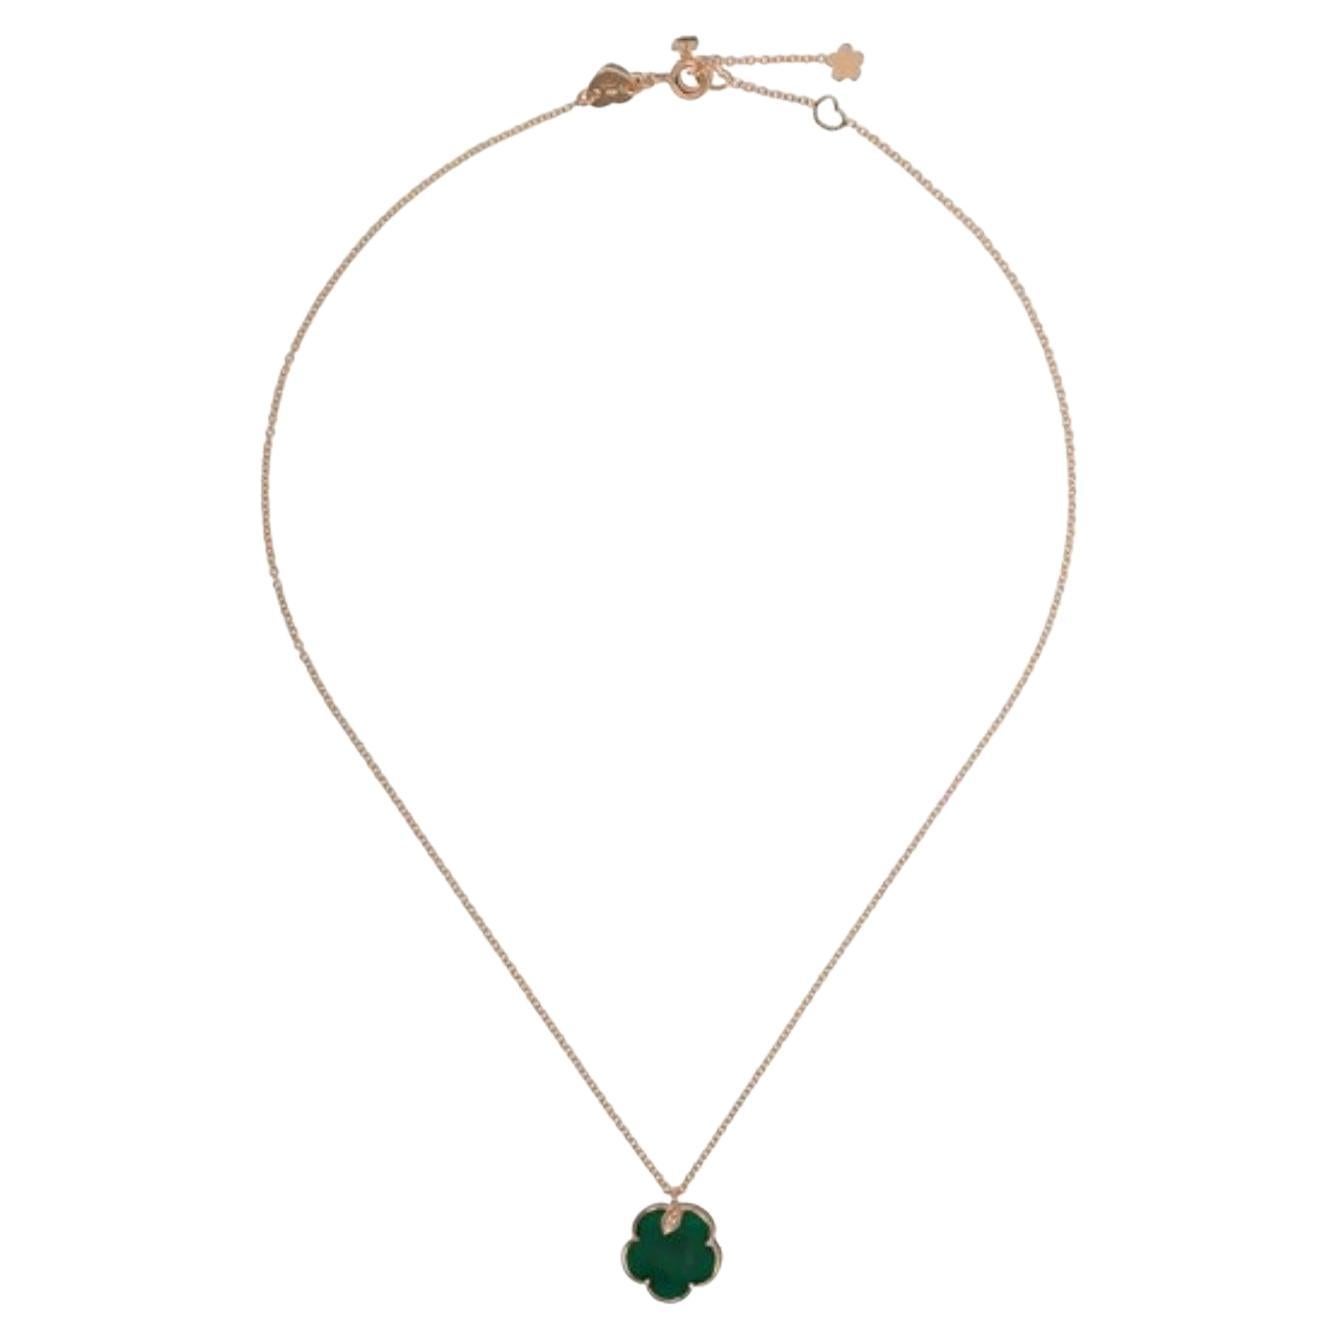 Necklace in 18k Rose Gold with Green Agate and Diamonds '16138R'